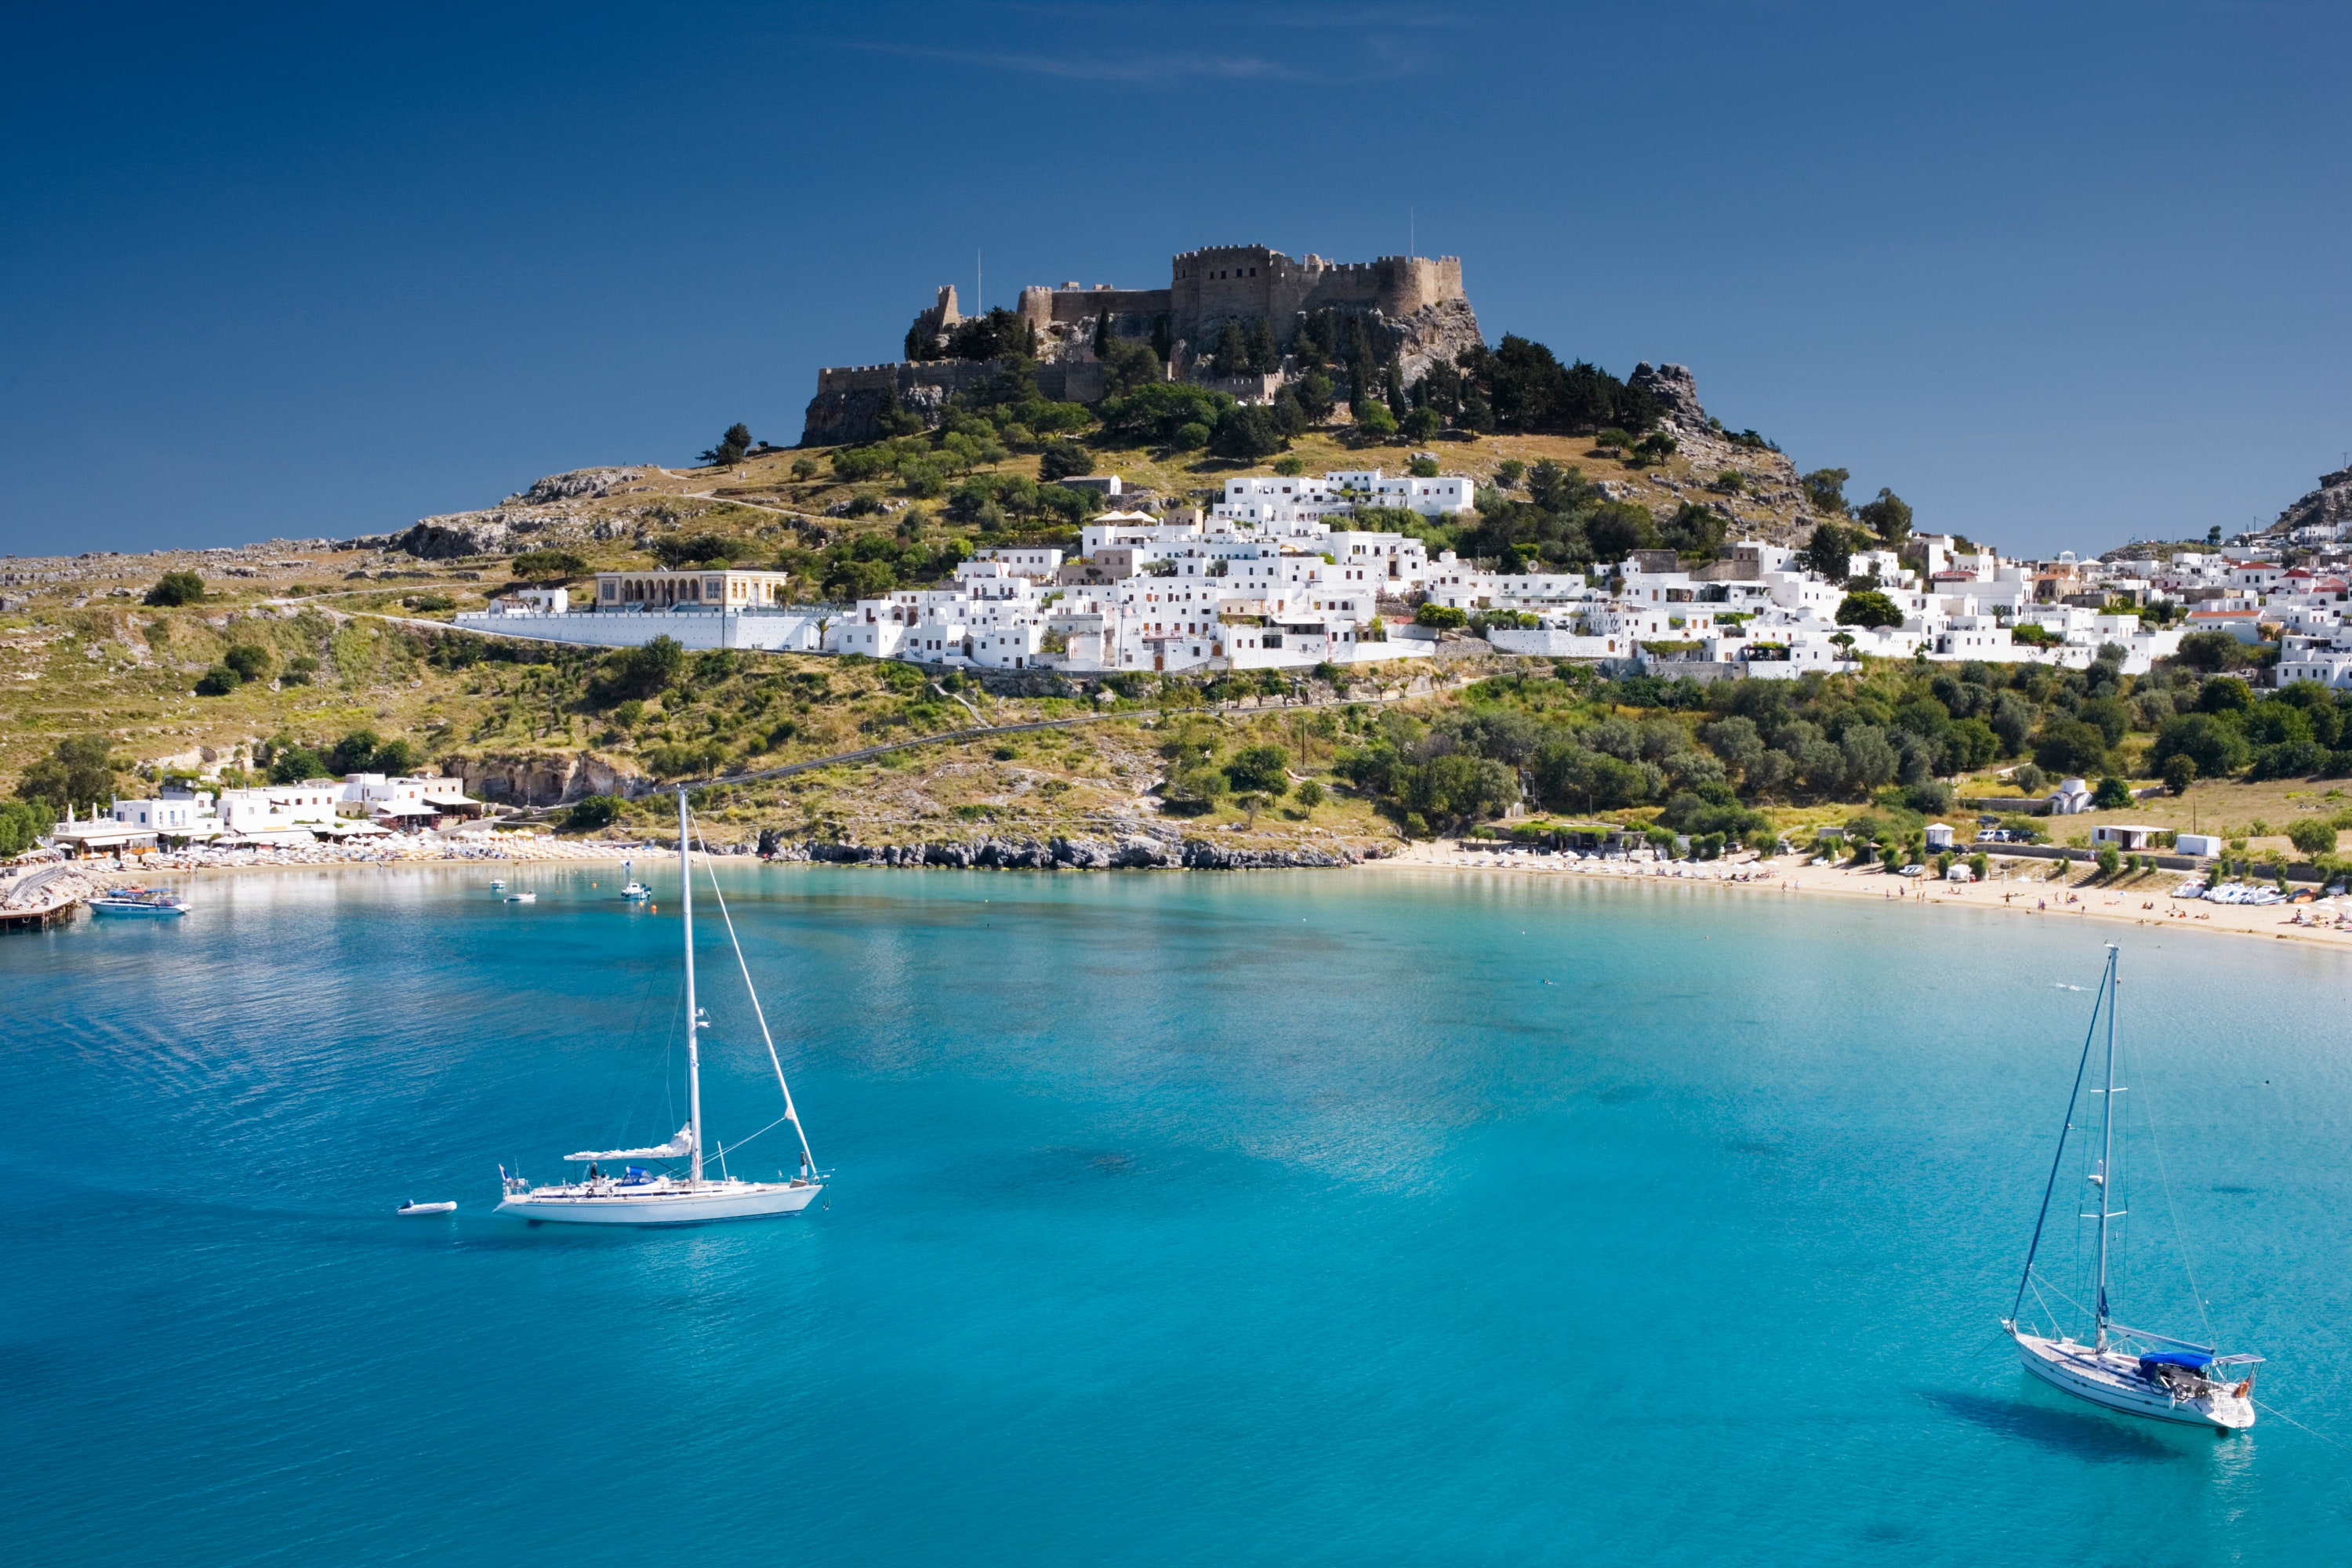 With its calm, clear waters and warm Mediterranean climate, the Ionian sea offers ideal conditions for beginner sailors. Quezada recommends sailing down the western coast of Greece and the island of Corfu, where <a href="https://cna.st/affiliate-link/6hMwZ5F1cAhMhgQn9oATrfJ1oJx97a24hTE6Qo4fLhtNC2ZfEUUnmLx6yMnoUWfrSM5zpWoXaff7kEmbGaxZ3JXsEvihZsbDUt8x3vz5bLPy6GfPQ7wZp9paasQsh1CZrvALbk" rel="sponsored">Fairwinds Sailing School</a> offers “learn to sail” vacations from April to October. For a route closer to Athens, join a flotilla and hop between the <a href="https://www.cntraveler.com/gallery/best-greek-islands-to-visit?mbid=synd_msn_rss&utm_source=msn&utm_medium=syndication">Argo-Saronic Islands</a> in the Aegean Sea, but be aware that the Meltemi winds, which are especially strong during July and August, can make for trickier sailing conditions in this region.<p>Sign up to receive the latest news, expert tips, and inspiration on all things travel</p><a href="https://www.cntraveler.com/newsletter/the-daily?sourceCode=msnsend">Inspire Me</a>